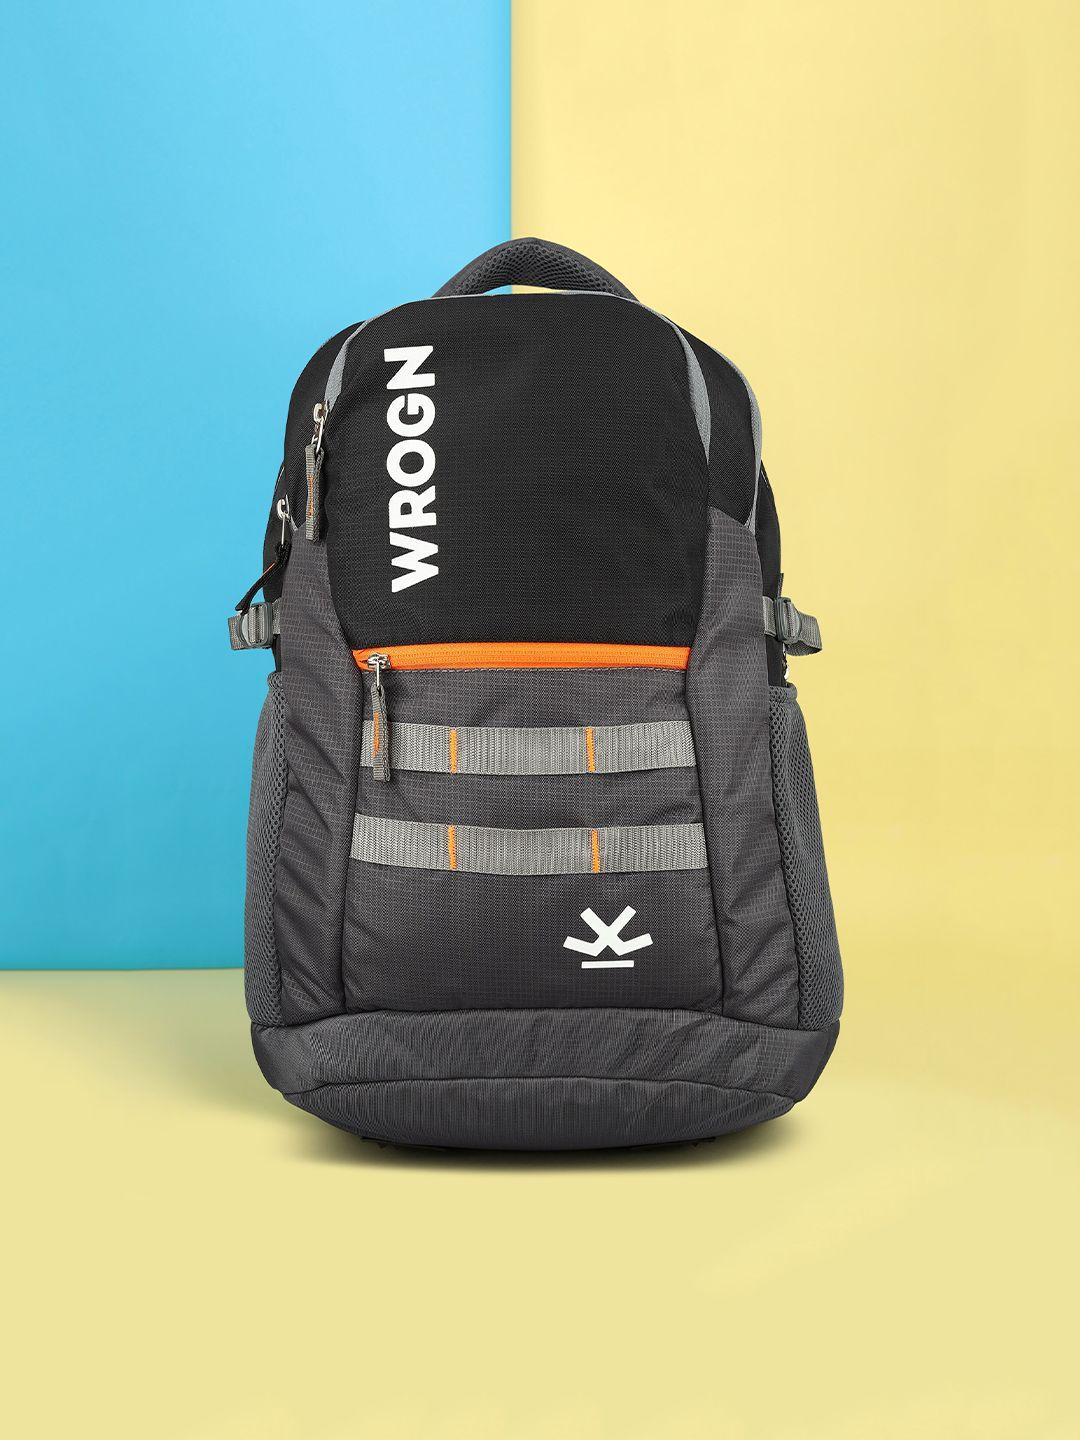 wrogn unisex brand logo backpack with reflective strip